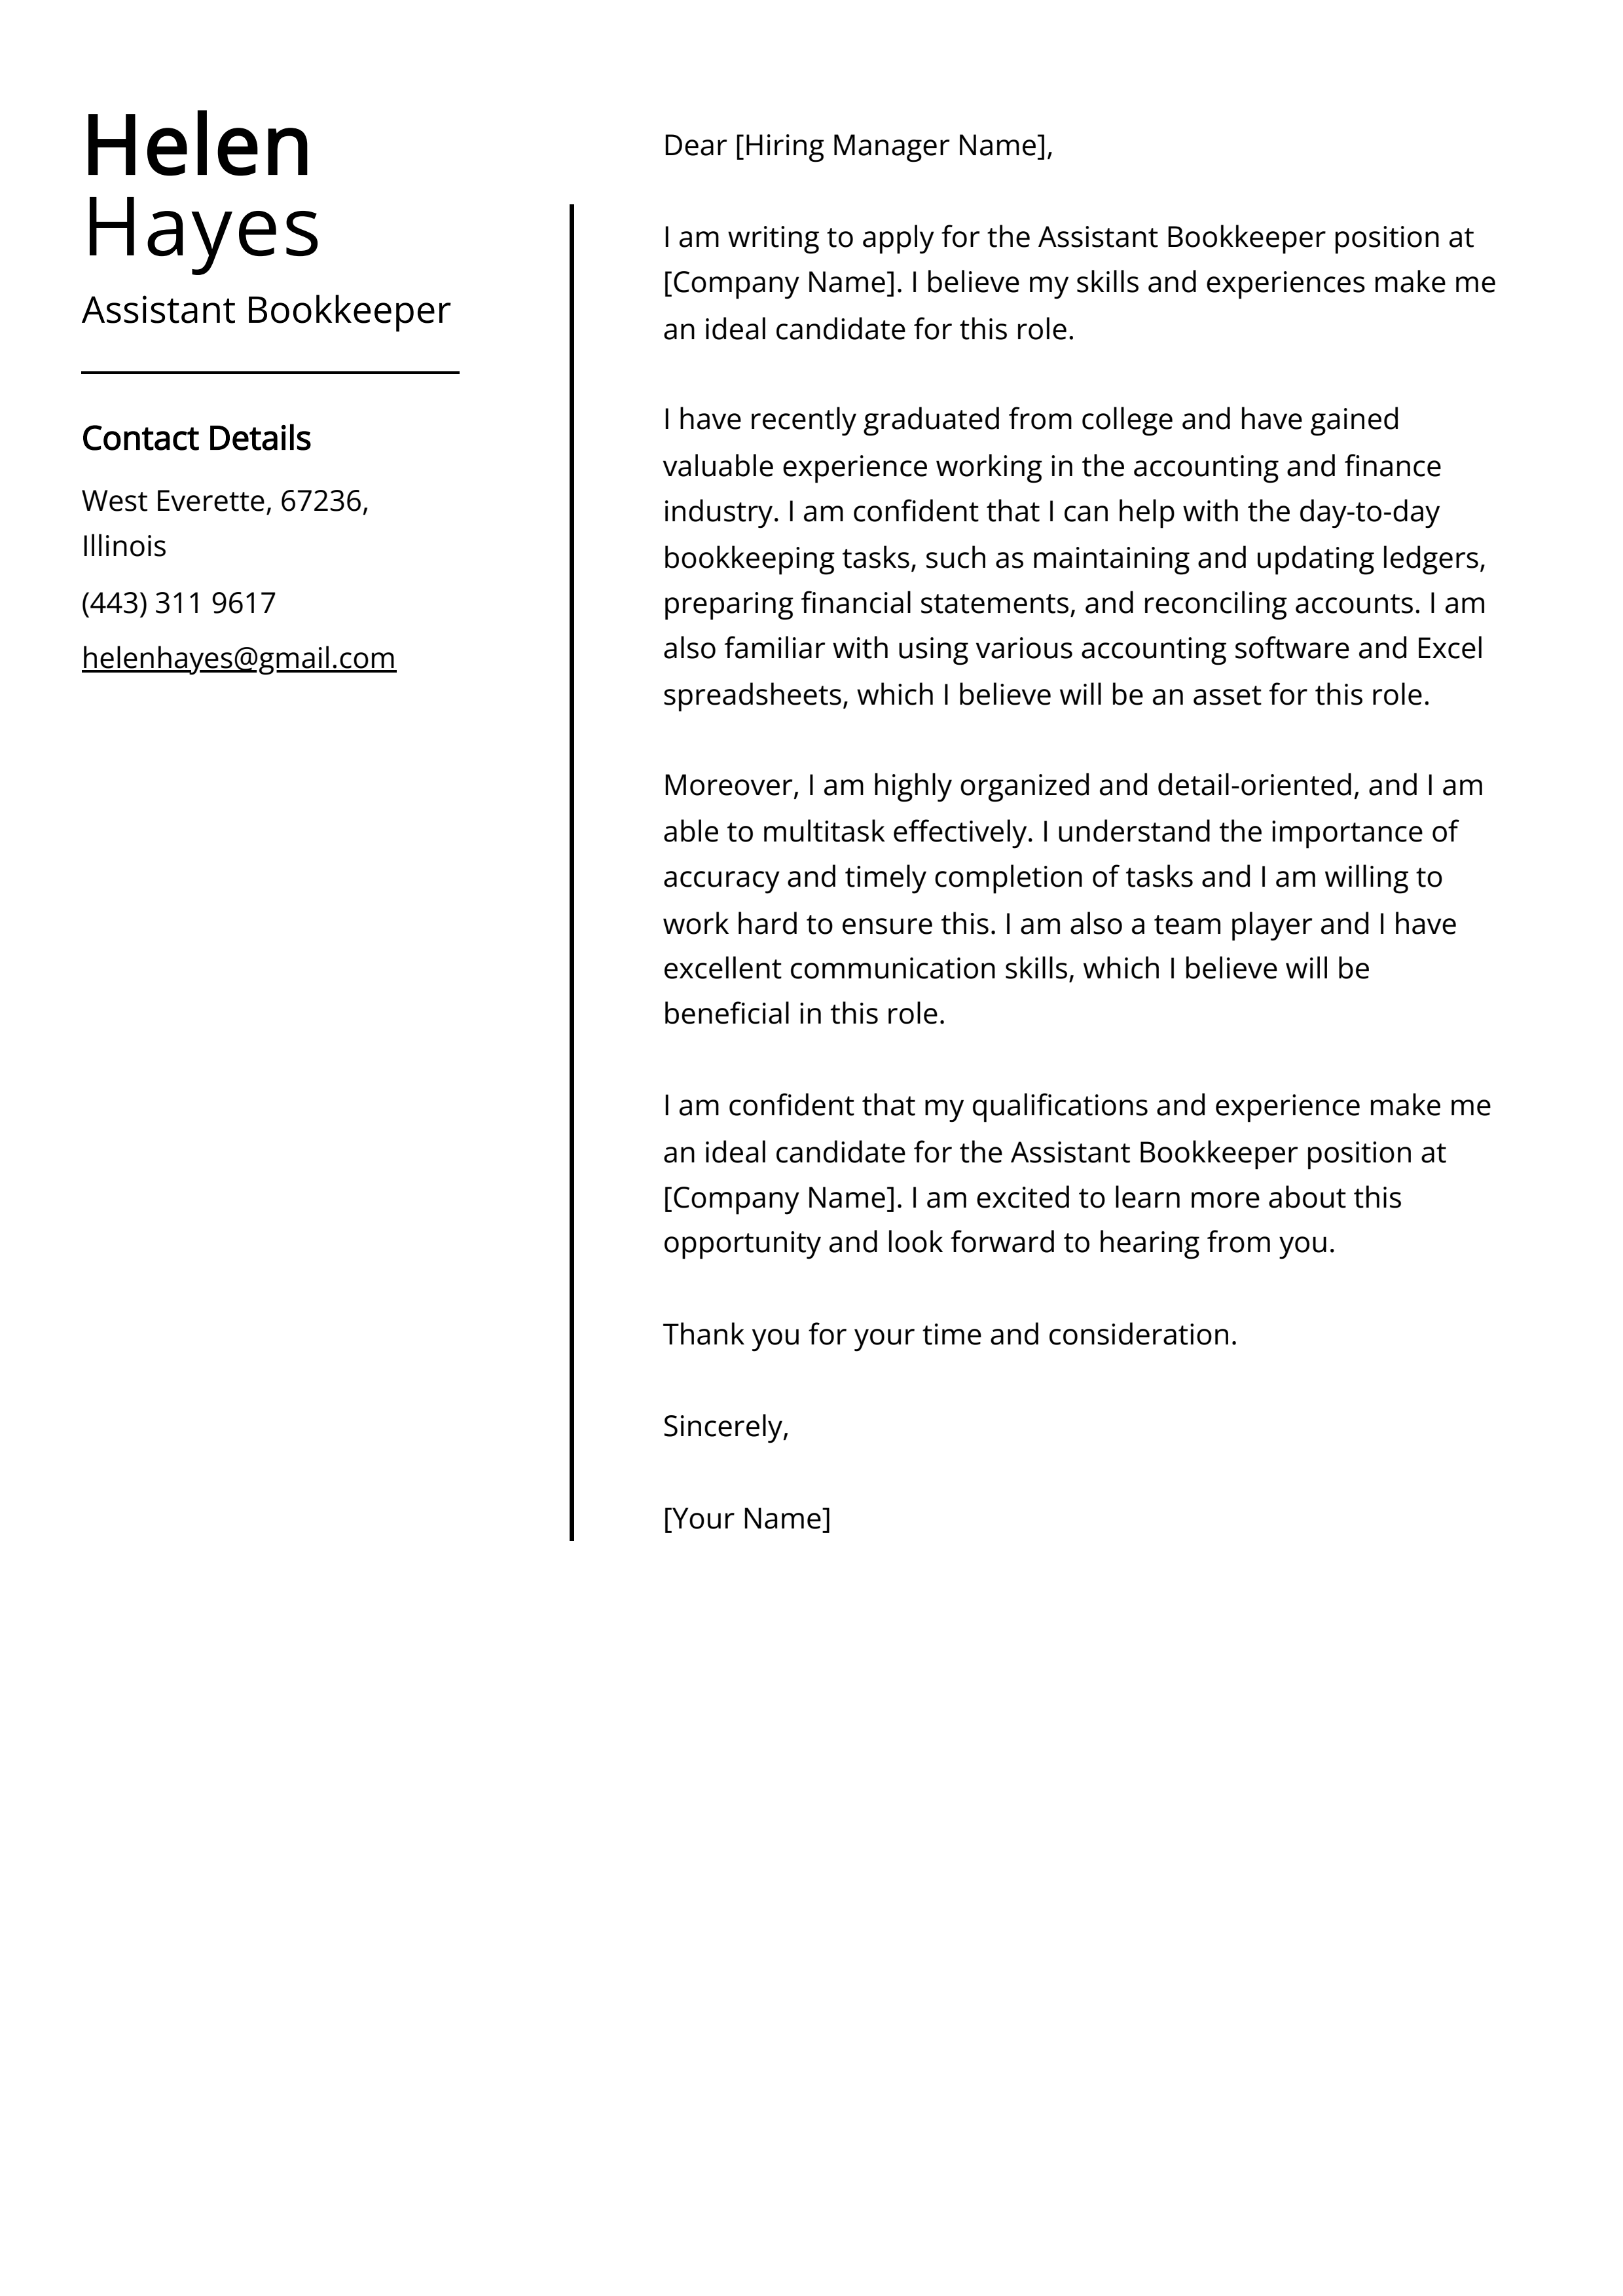 Assistant Bookkeeper Cover Letter Example